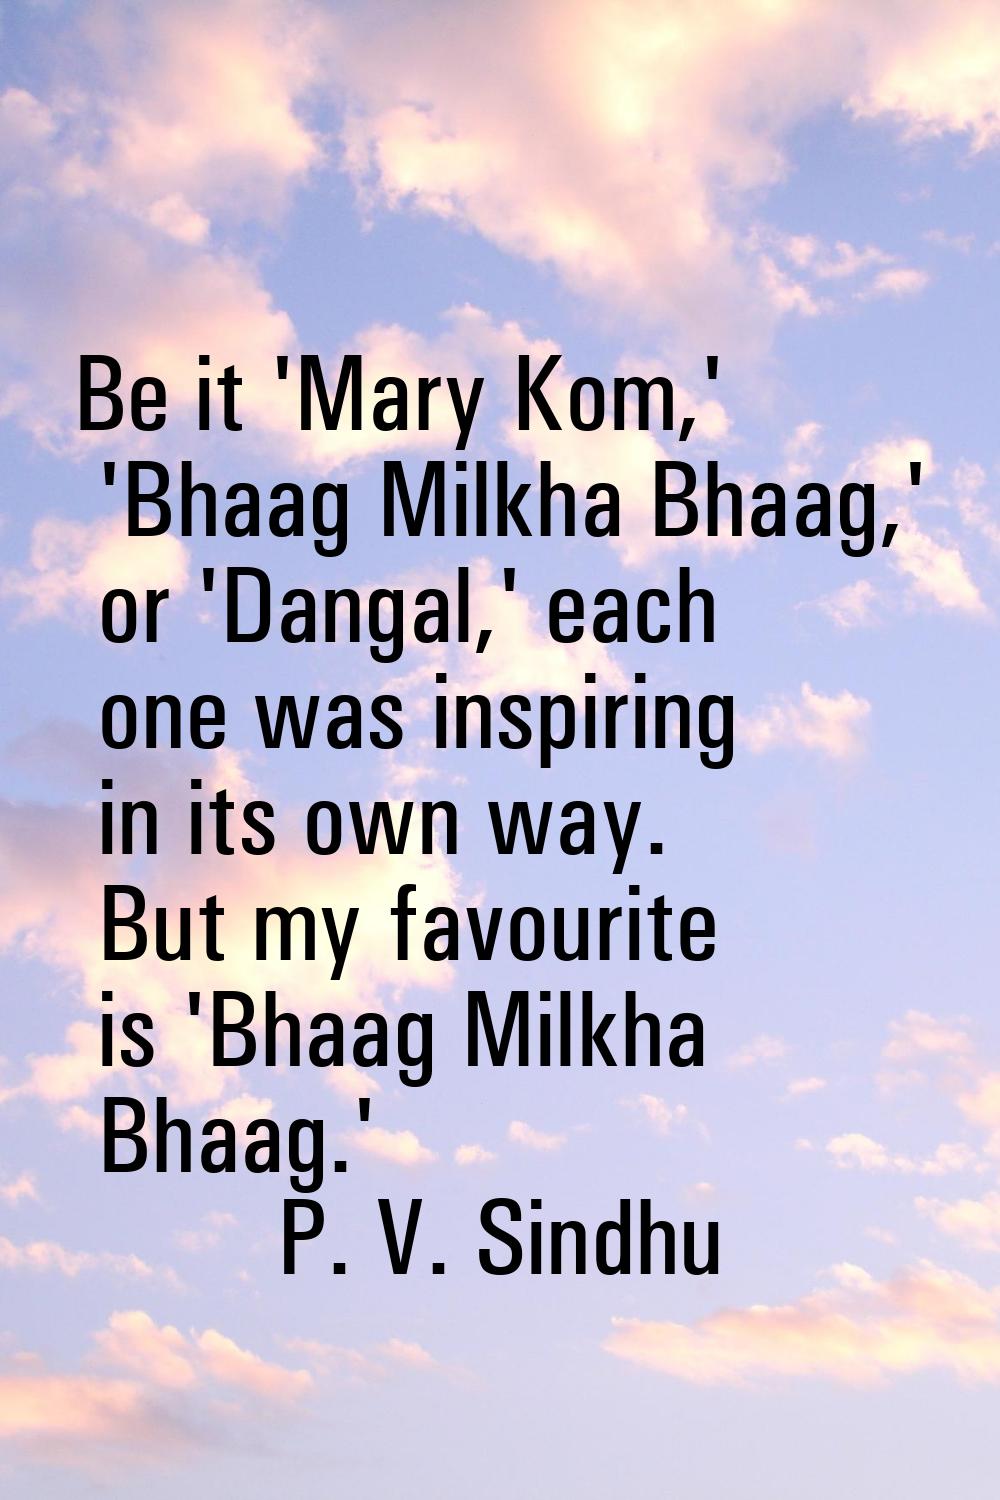 Be it 'Mary Kom,' 'Bhaag Milkha Bhaag,' or 'Dangal,' each one was inspiring in its own way. But my 